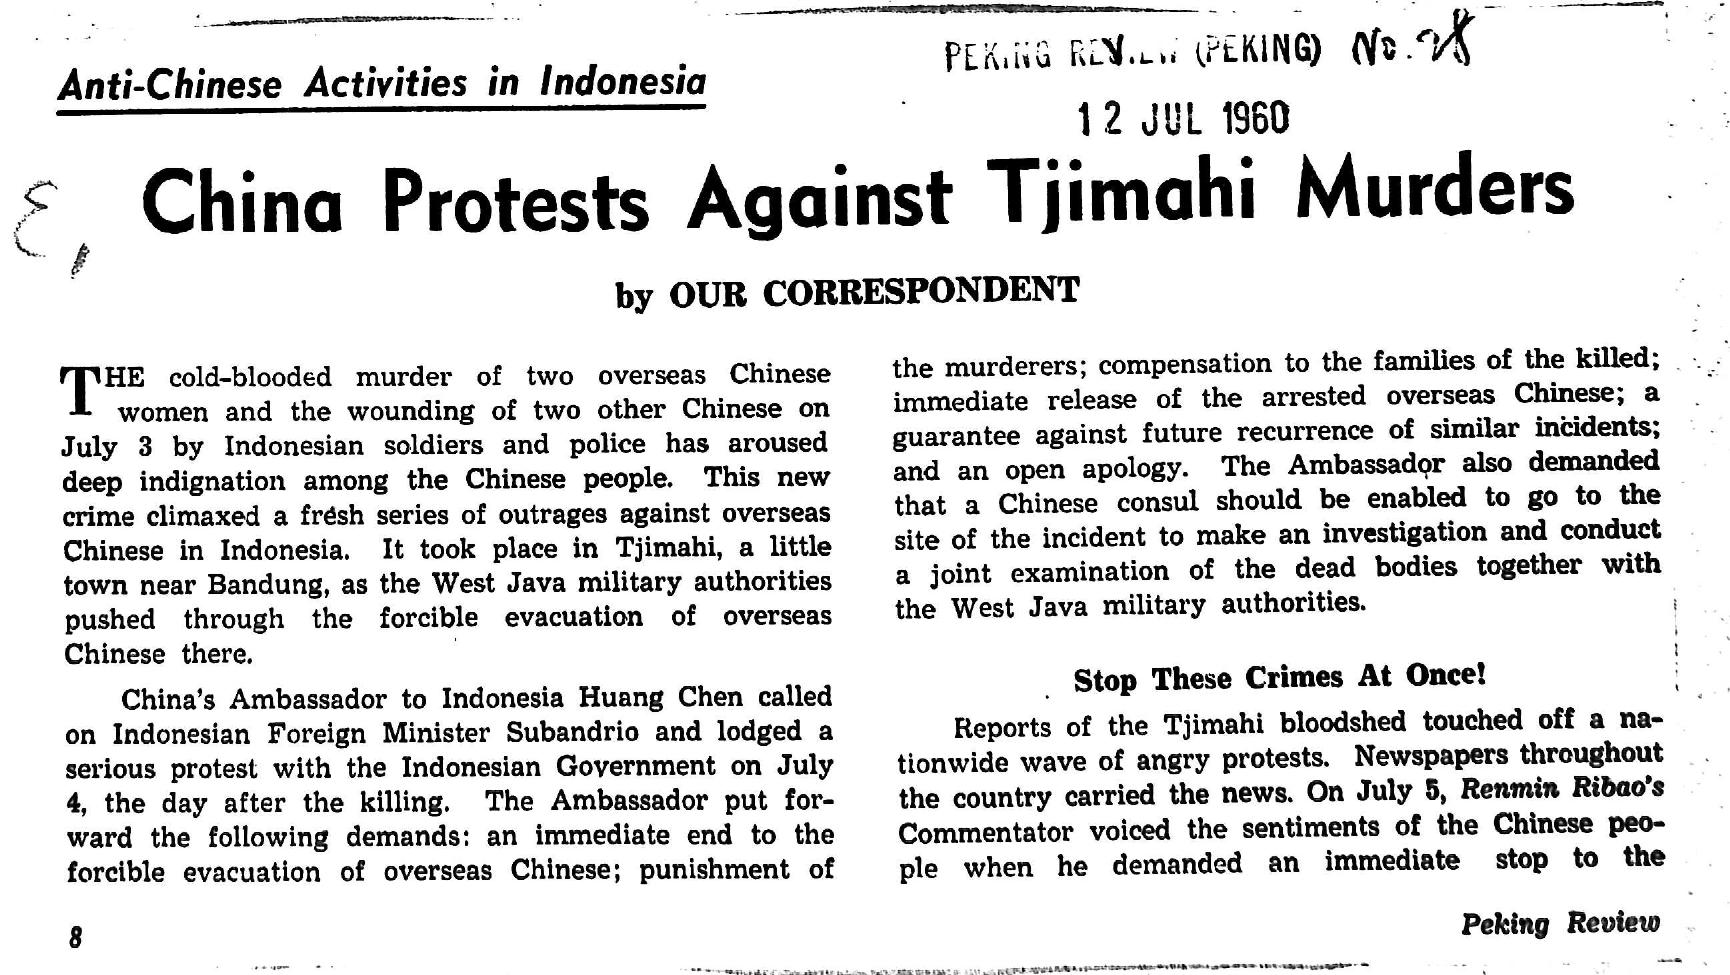 ANTI-CHINESE ACTIVITIES IN INDONESIA, CHINA PROTESTS AGAINST TJIMAHI MURDERS